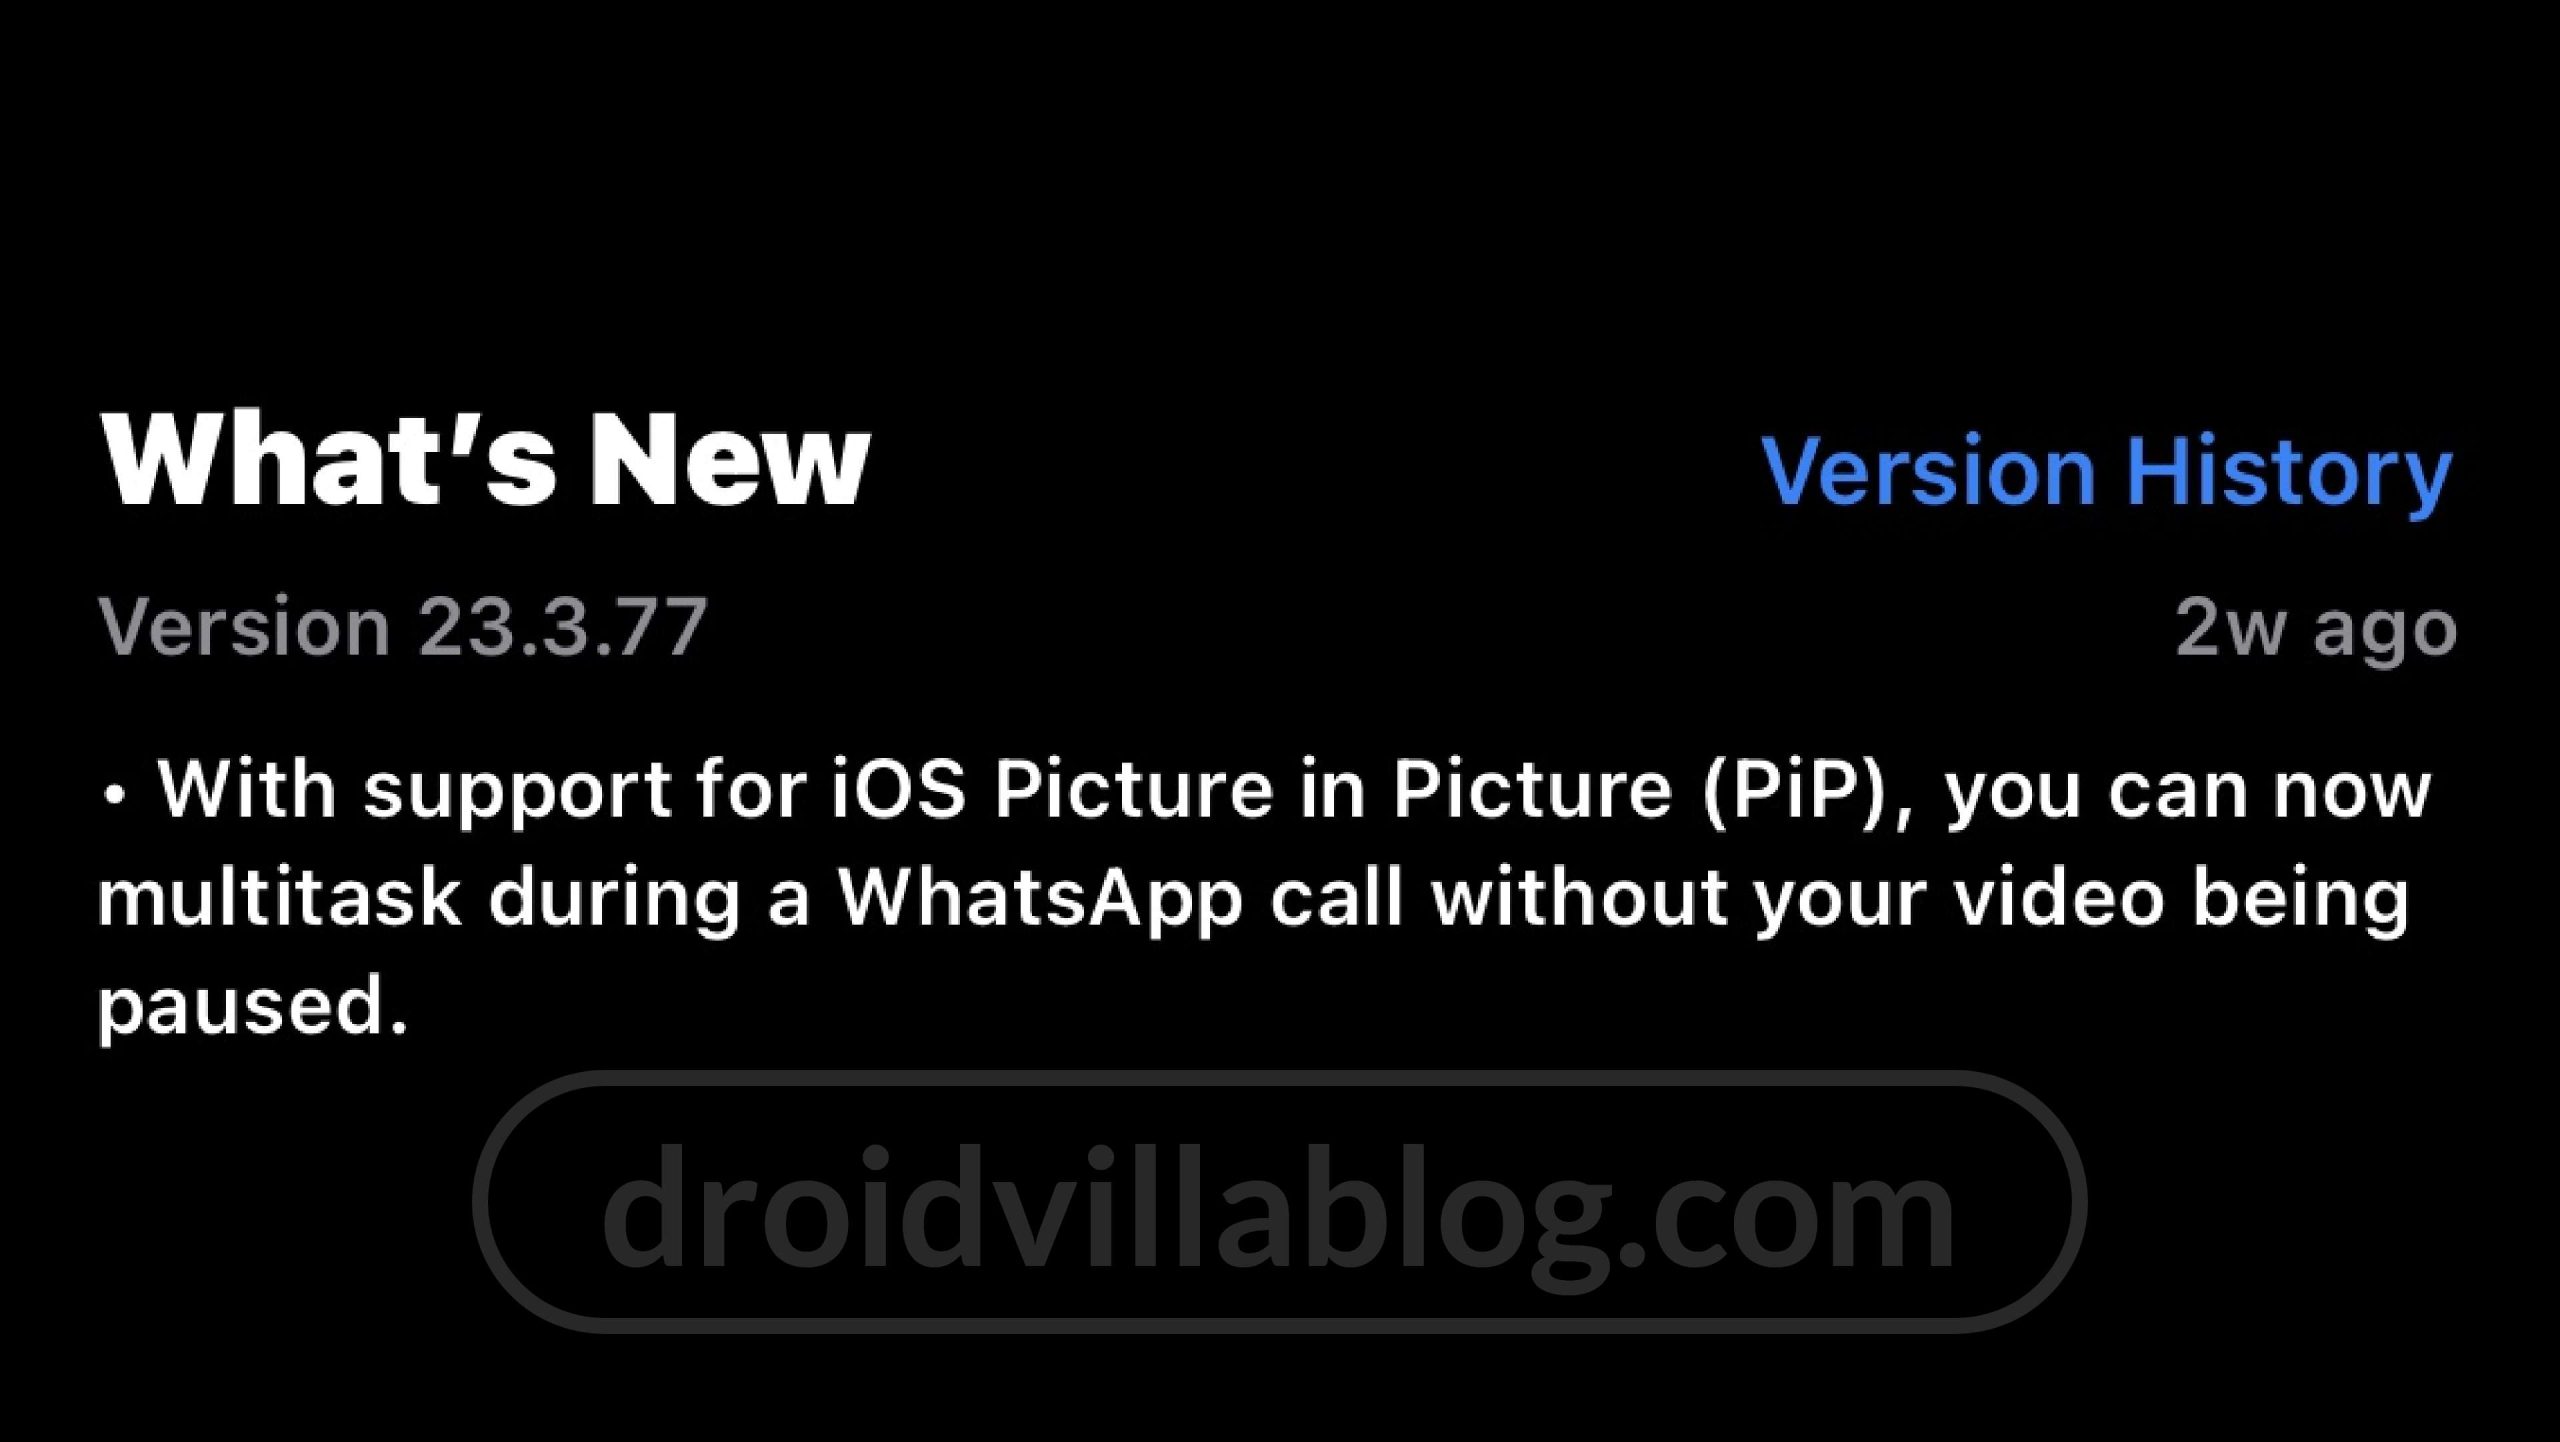 WhatsApp iOS Picture in Picture